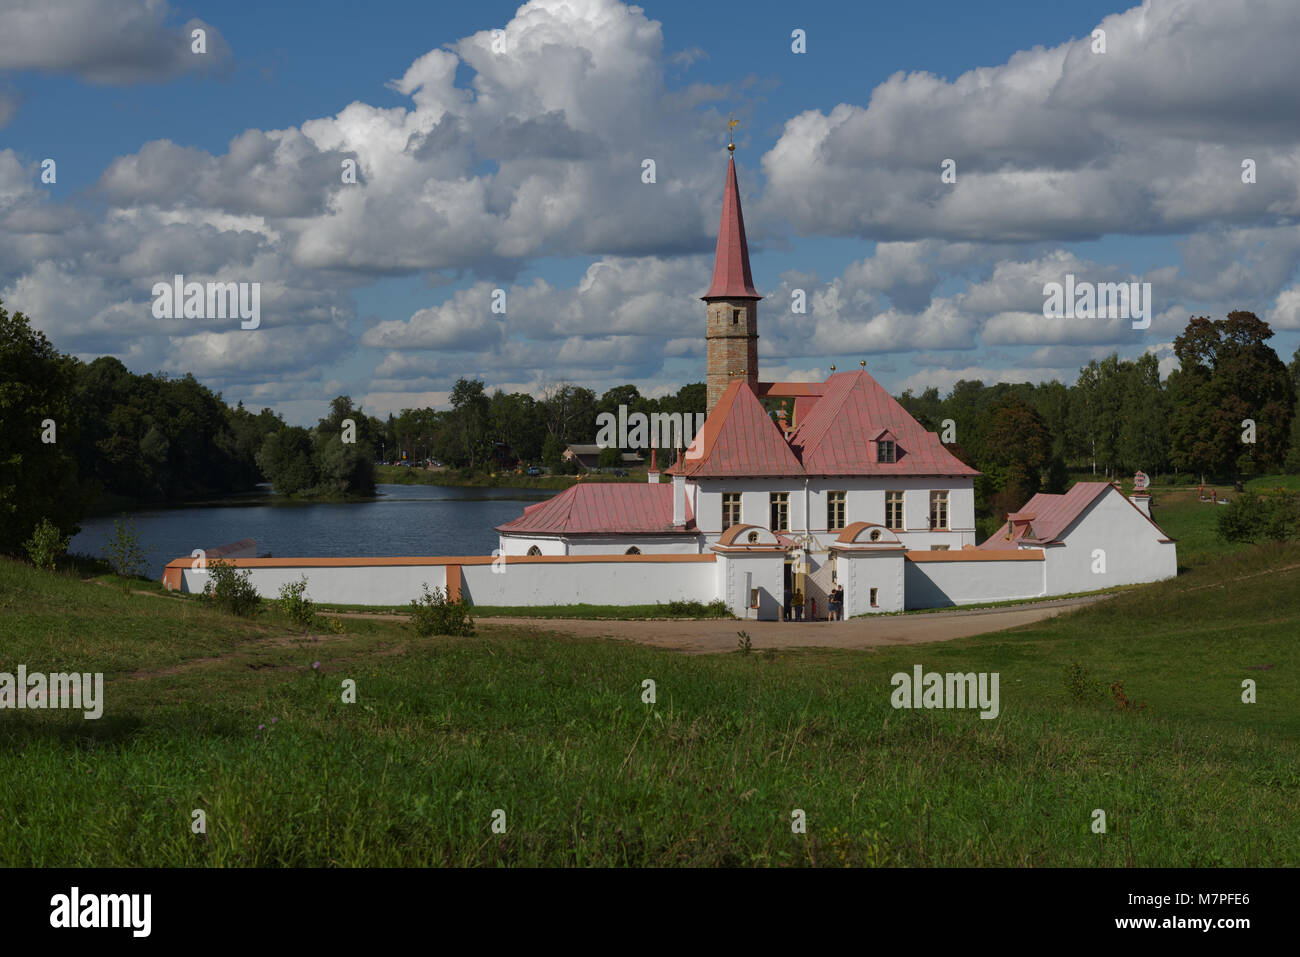 Gatchina, St. Petersburg, Russia - August 30, 2015: People in front of the Priory Palace. It was built in 1799 by the architect N. A. Lvov mostly usin Stock Photo